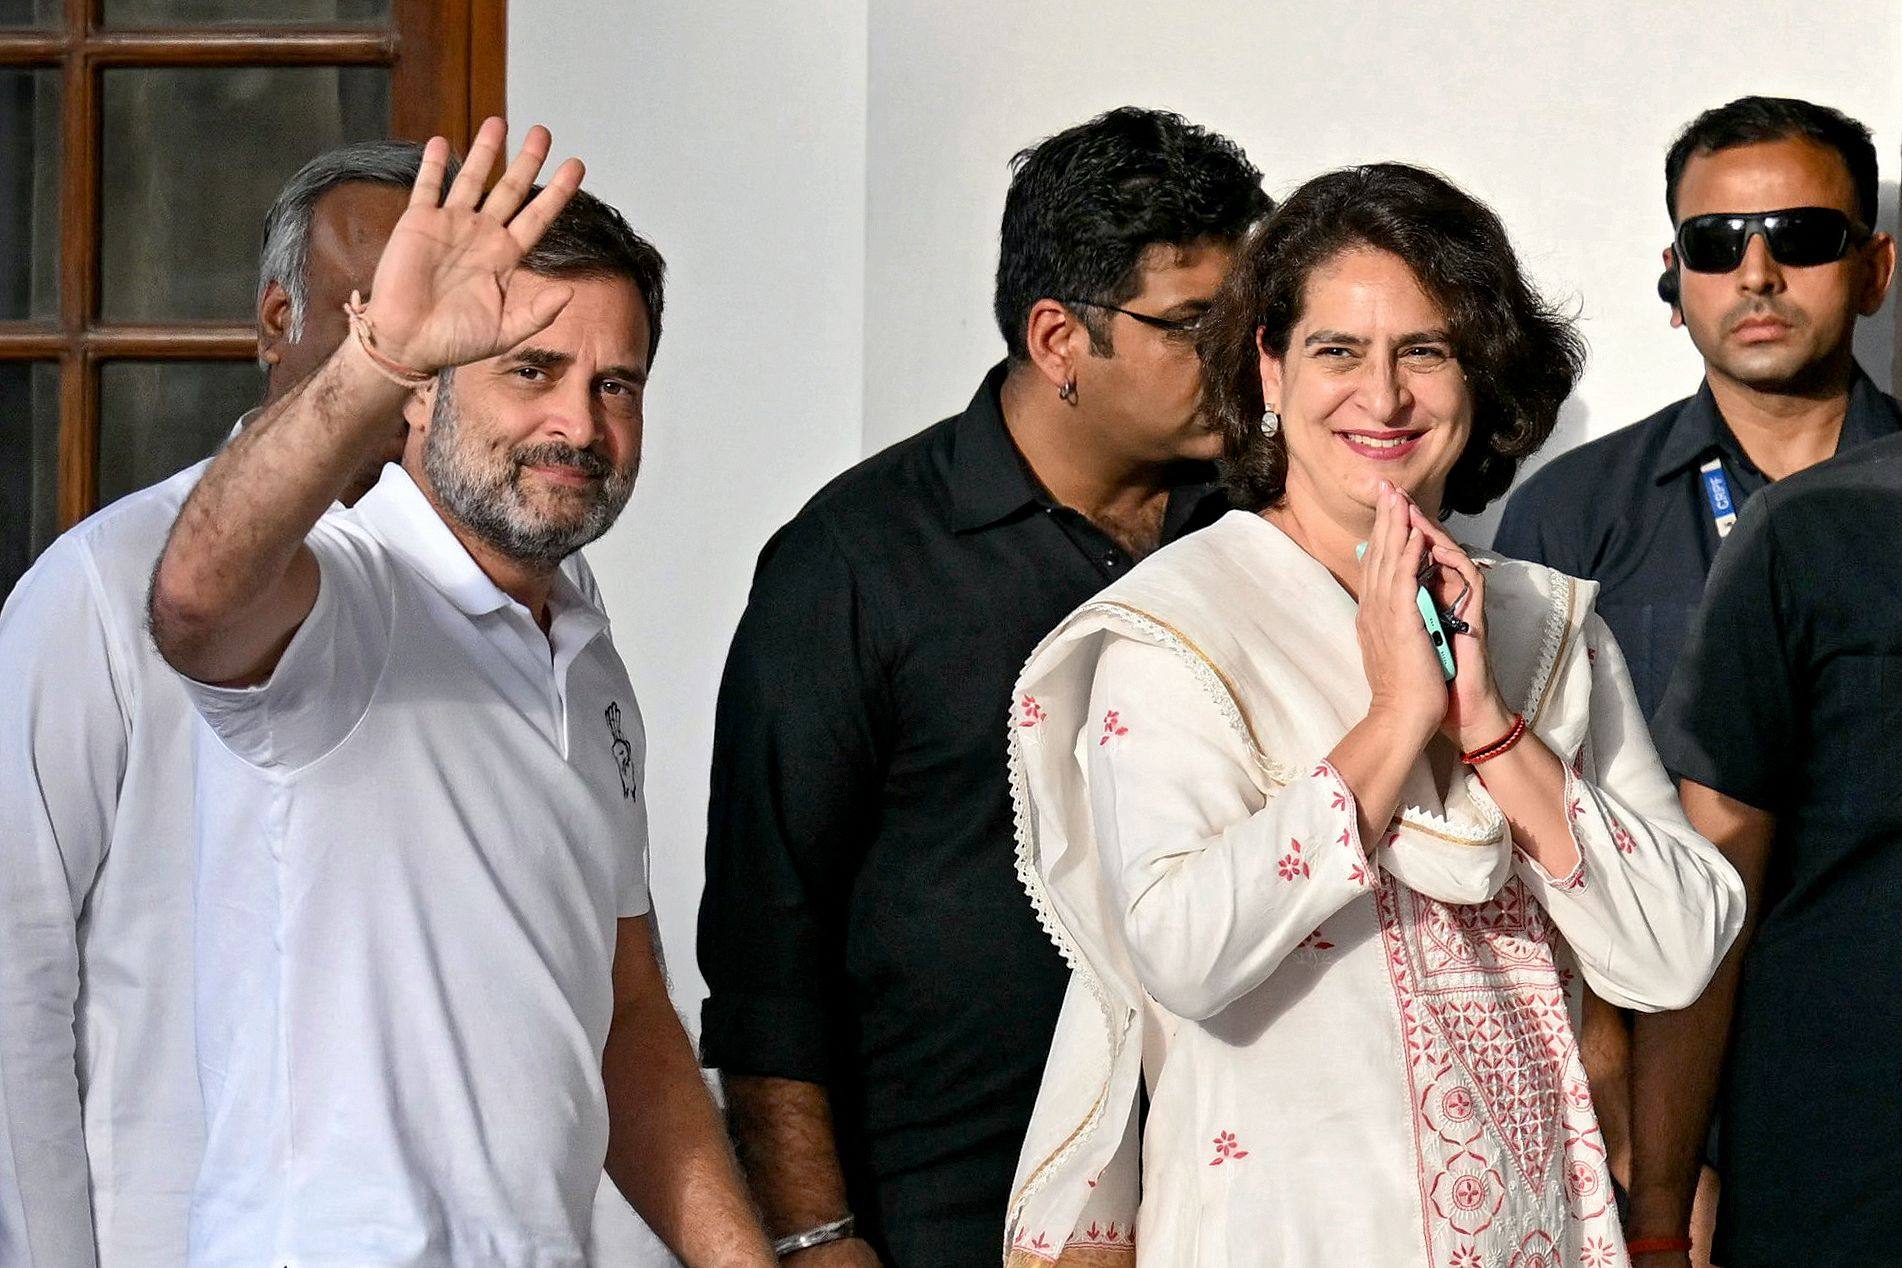 Congress party leaders Rahul Gandhi (left) and his sister Priyanka Gandhi Vadra (second from right) arrive for a meeting in New Delhi on June 5. Photo: AFP